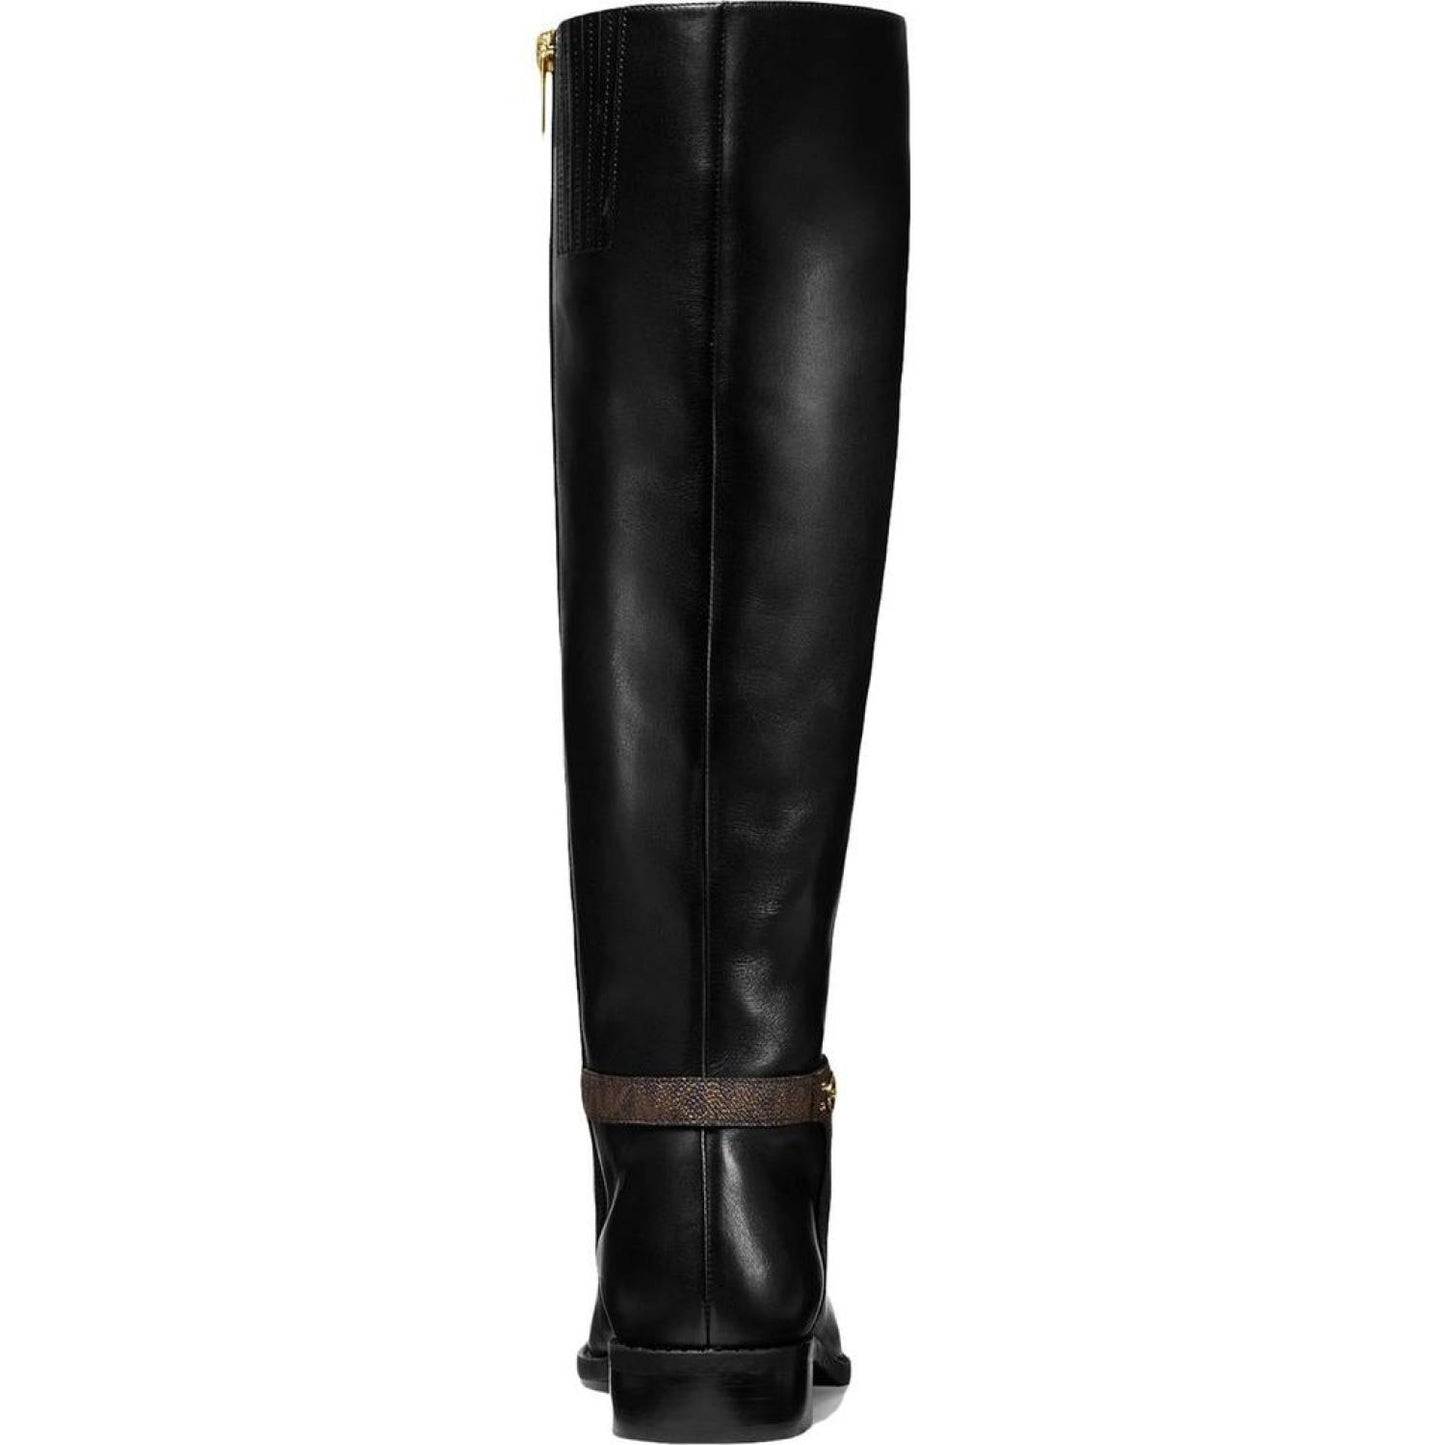 Finley Womens Leather Tall Mid-Calf Boots